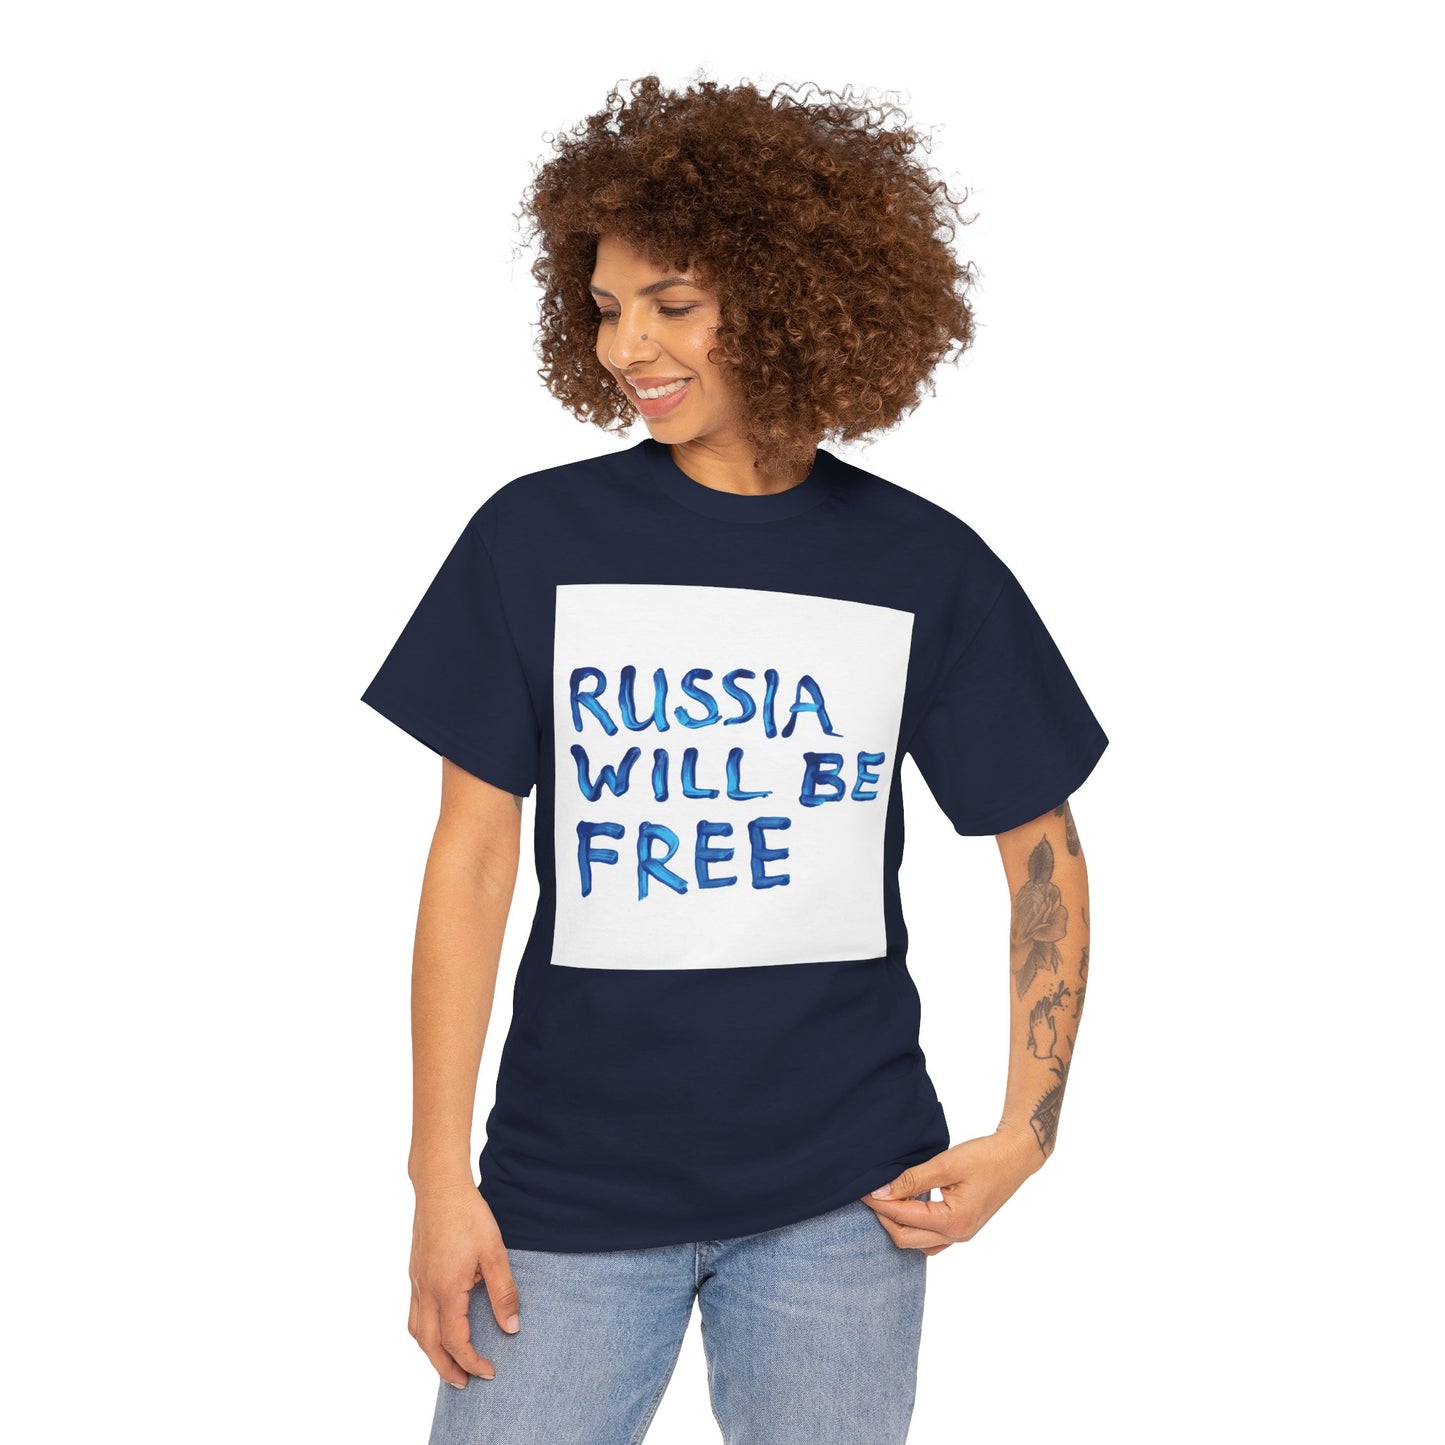 Russia will be Free T-shirt